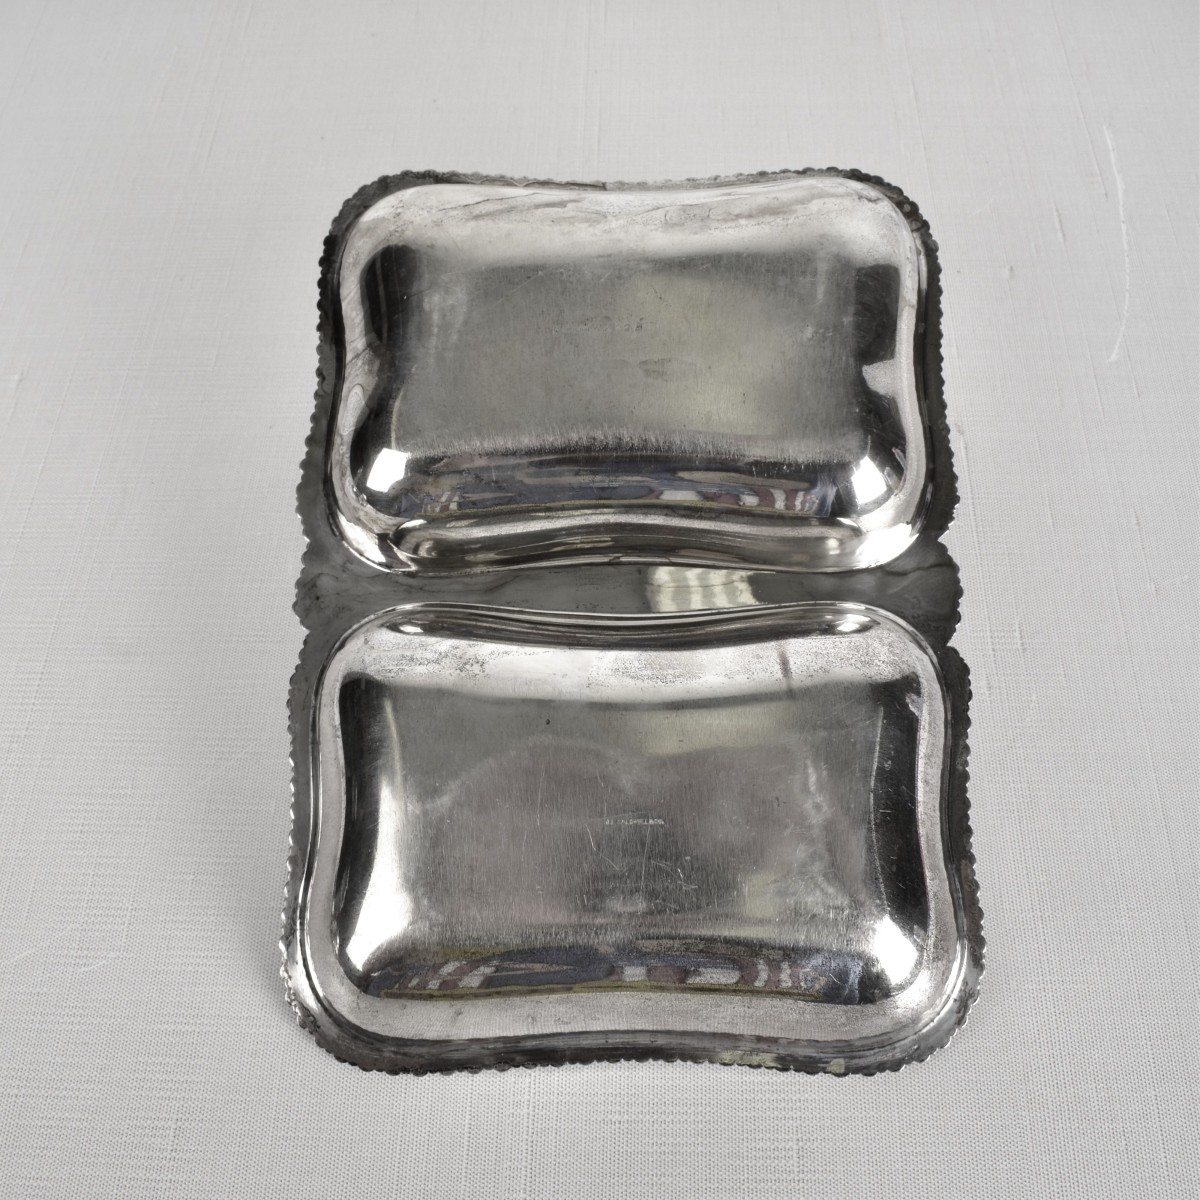 Grouping of Sterling Silver Tableware